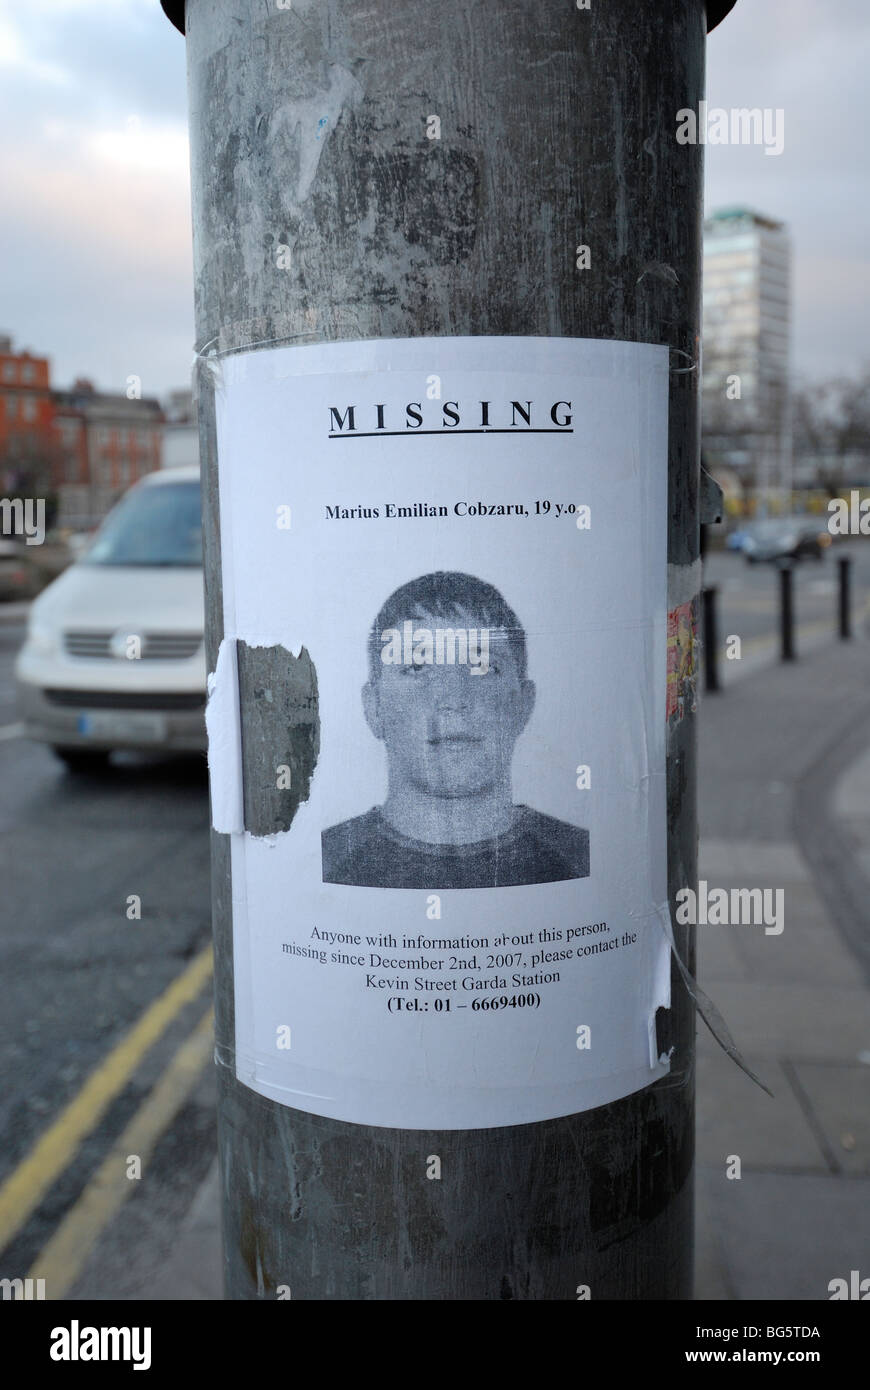 Missing Person poster on lamp post in Dublin Ireland Stock Photo